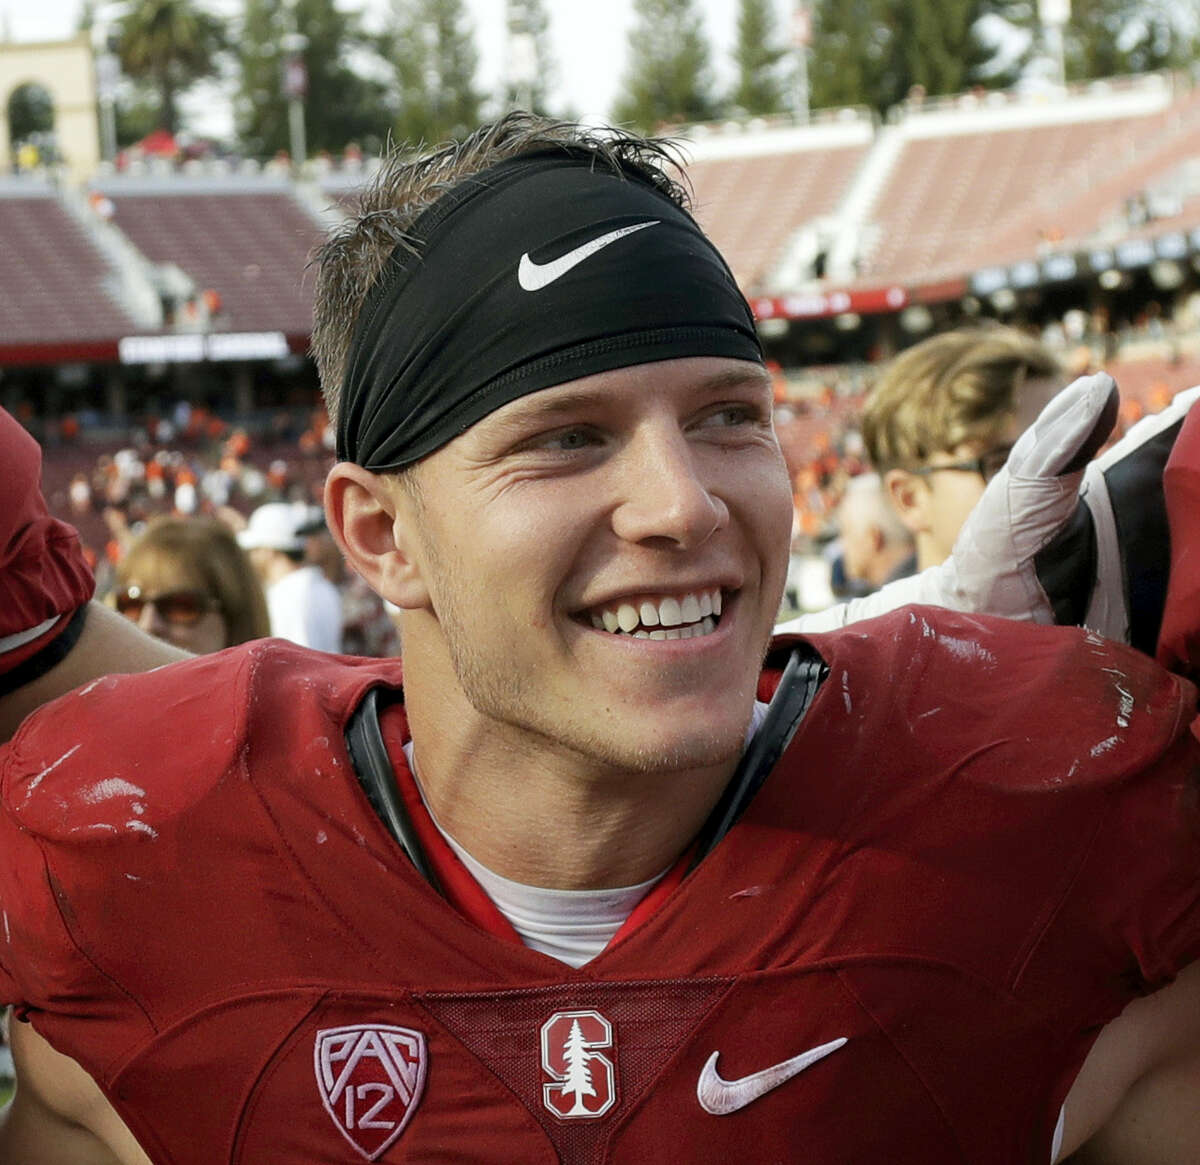 In this Nov. 5 file photo, Stanford running back Christian McCaffrey smiles after Stanford defeated Oregon State 26-15. McCaffrey is done playing college football. Stanford’s star running back announced on Twitter on Monday, Dec. 19, 2016, that he will not play in the Sun Bowl game against North Carolina on Dec. 30 in El Paso, Texas.